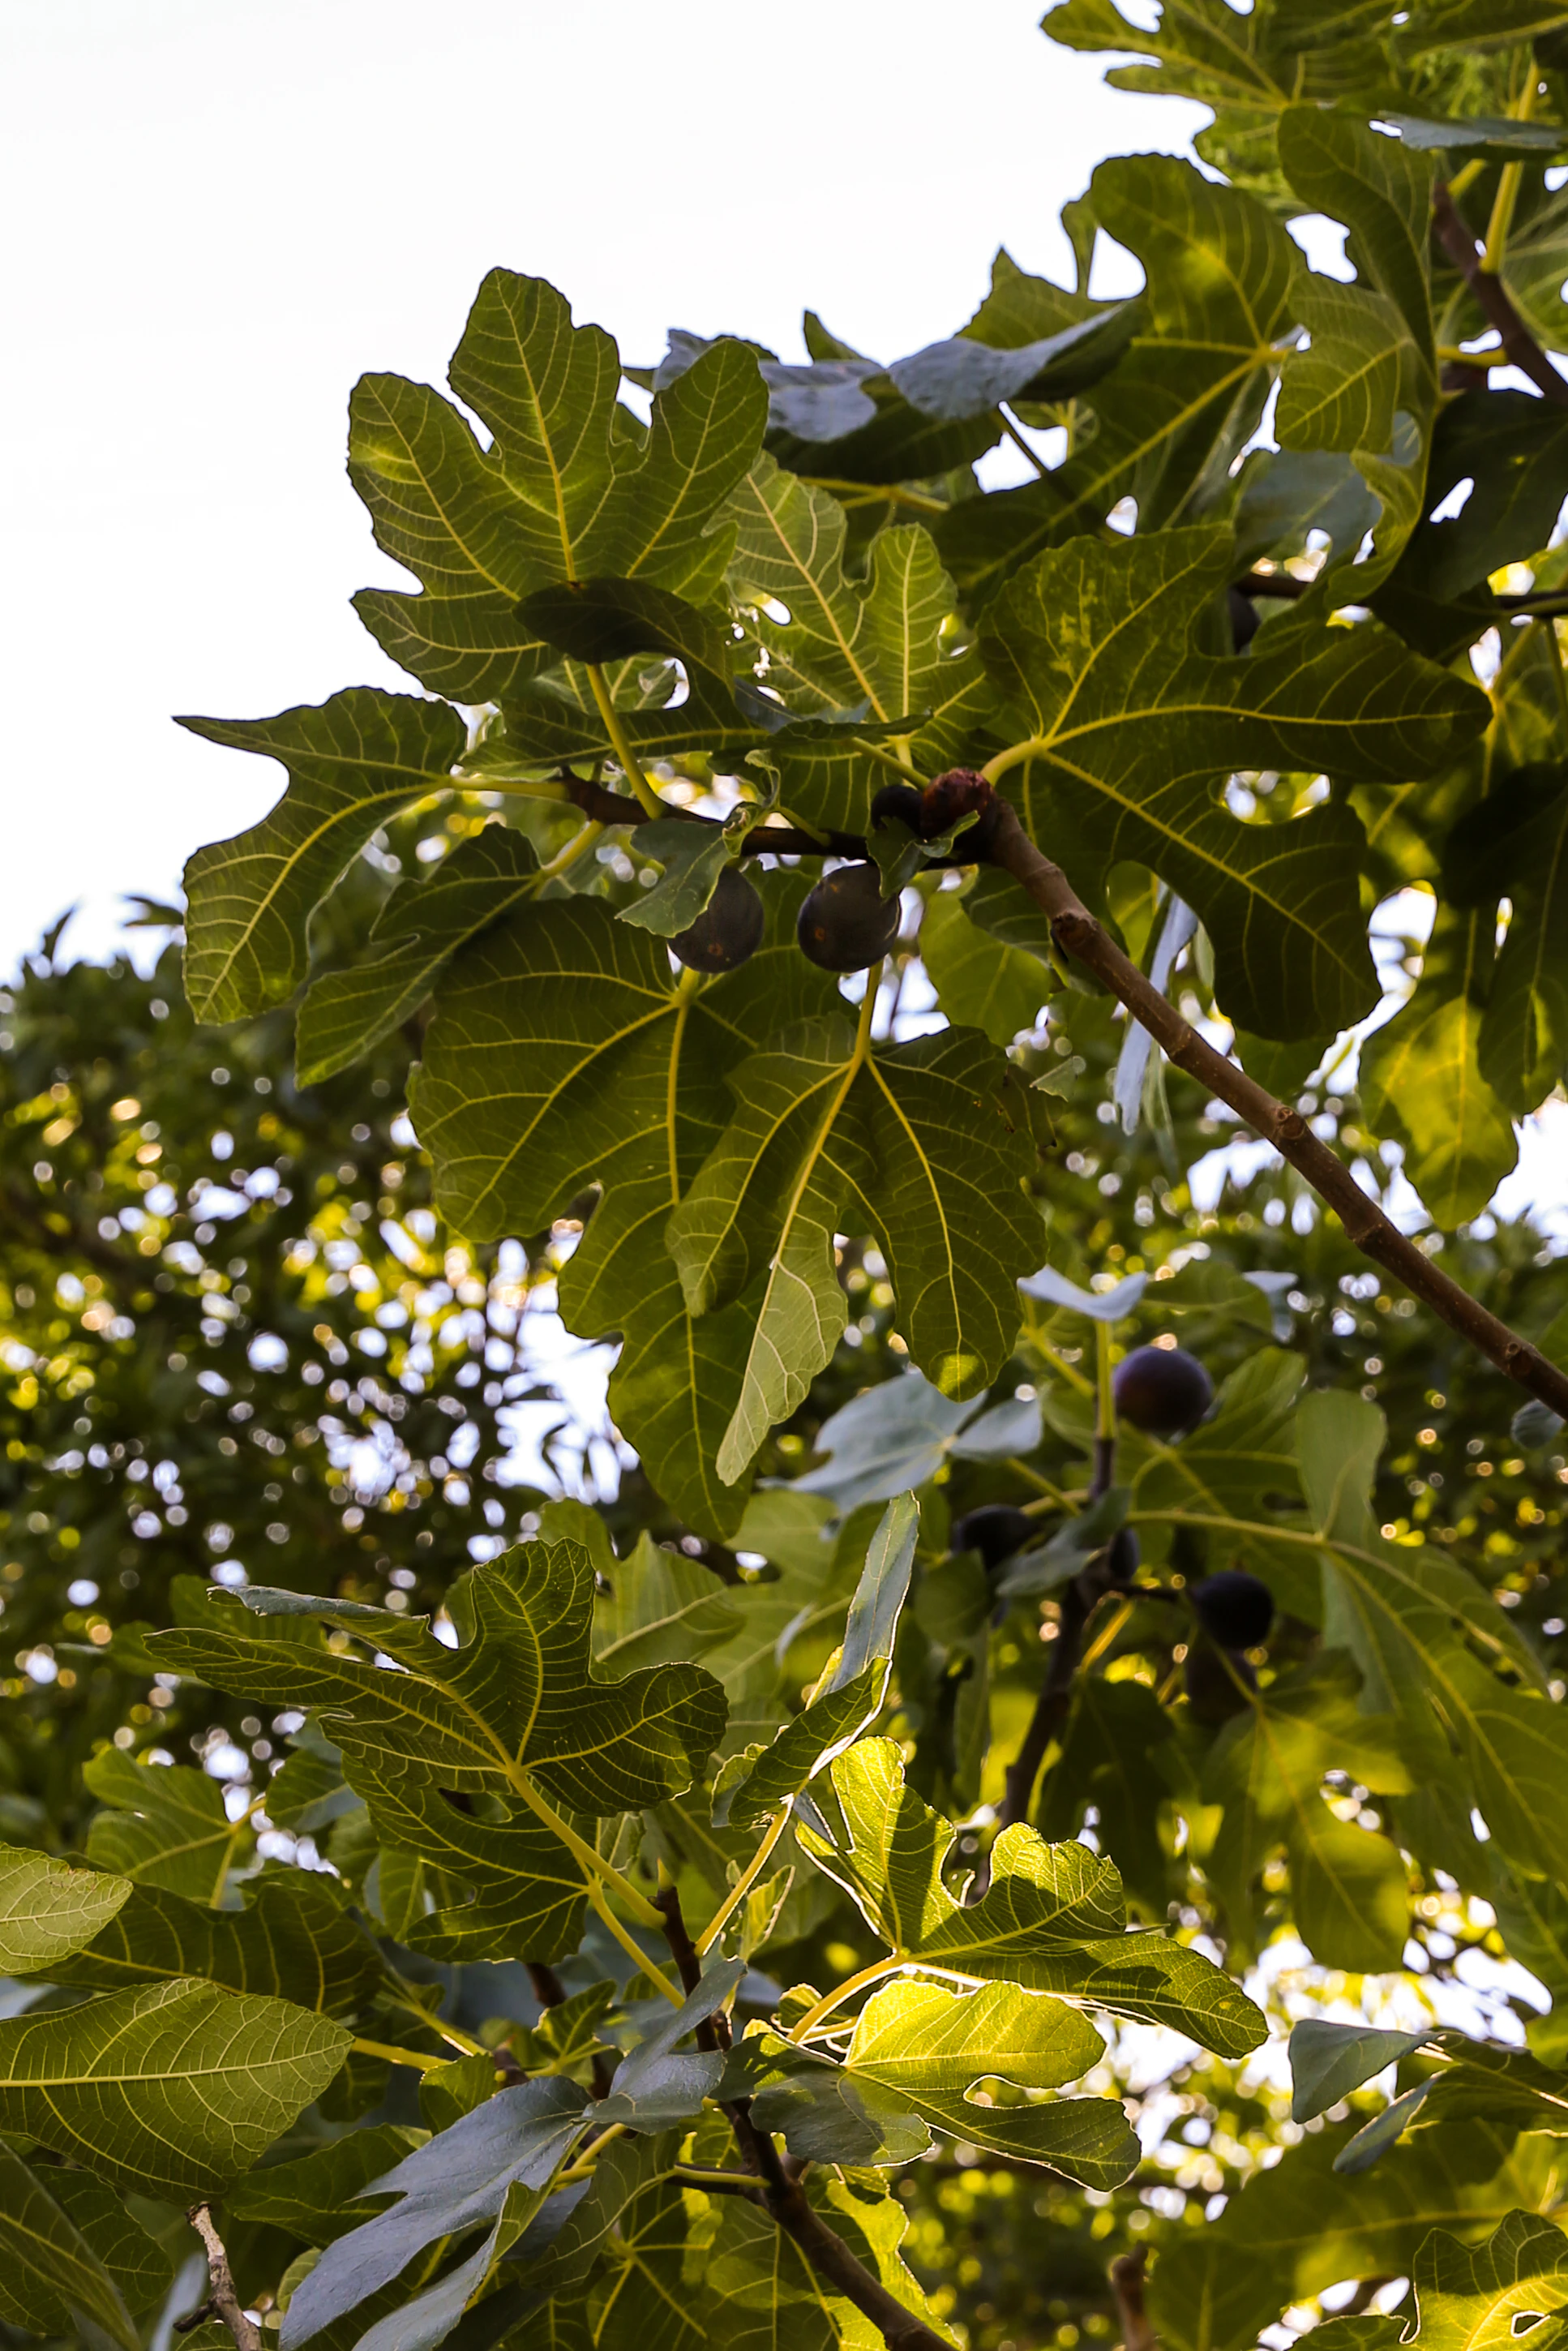 Figs growing on a tree.